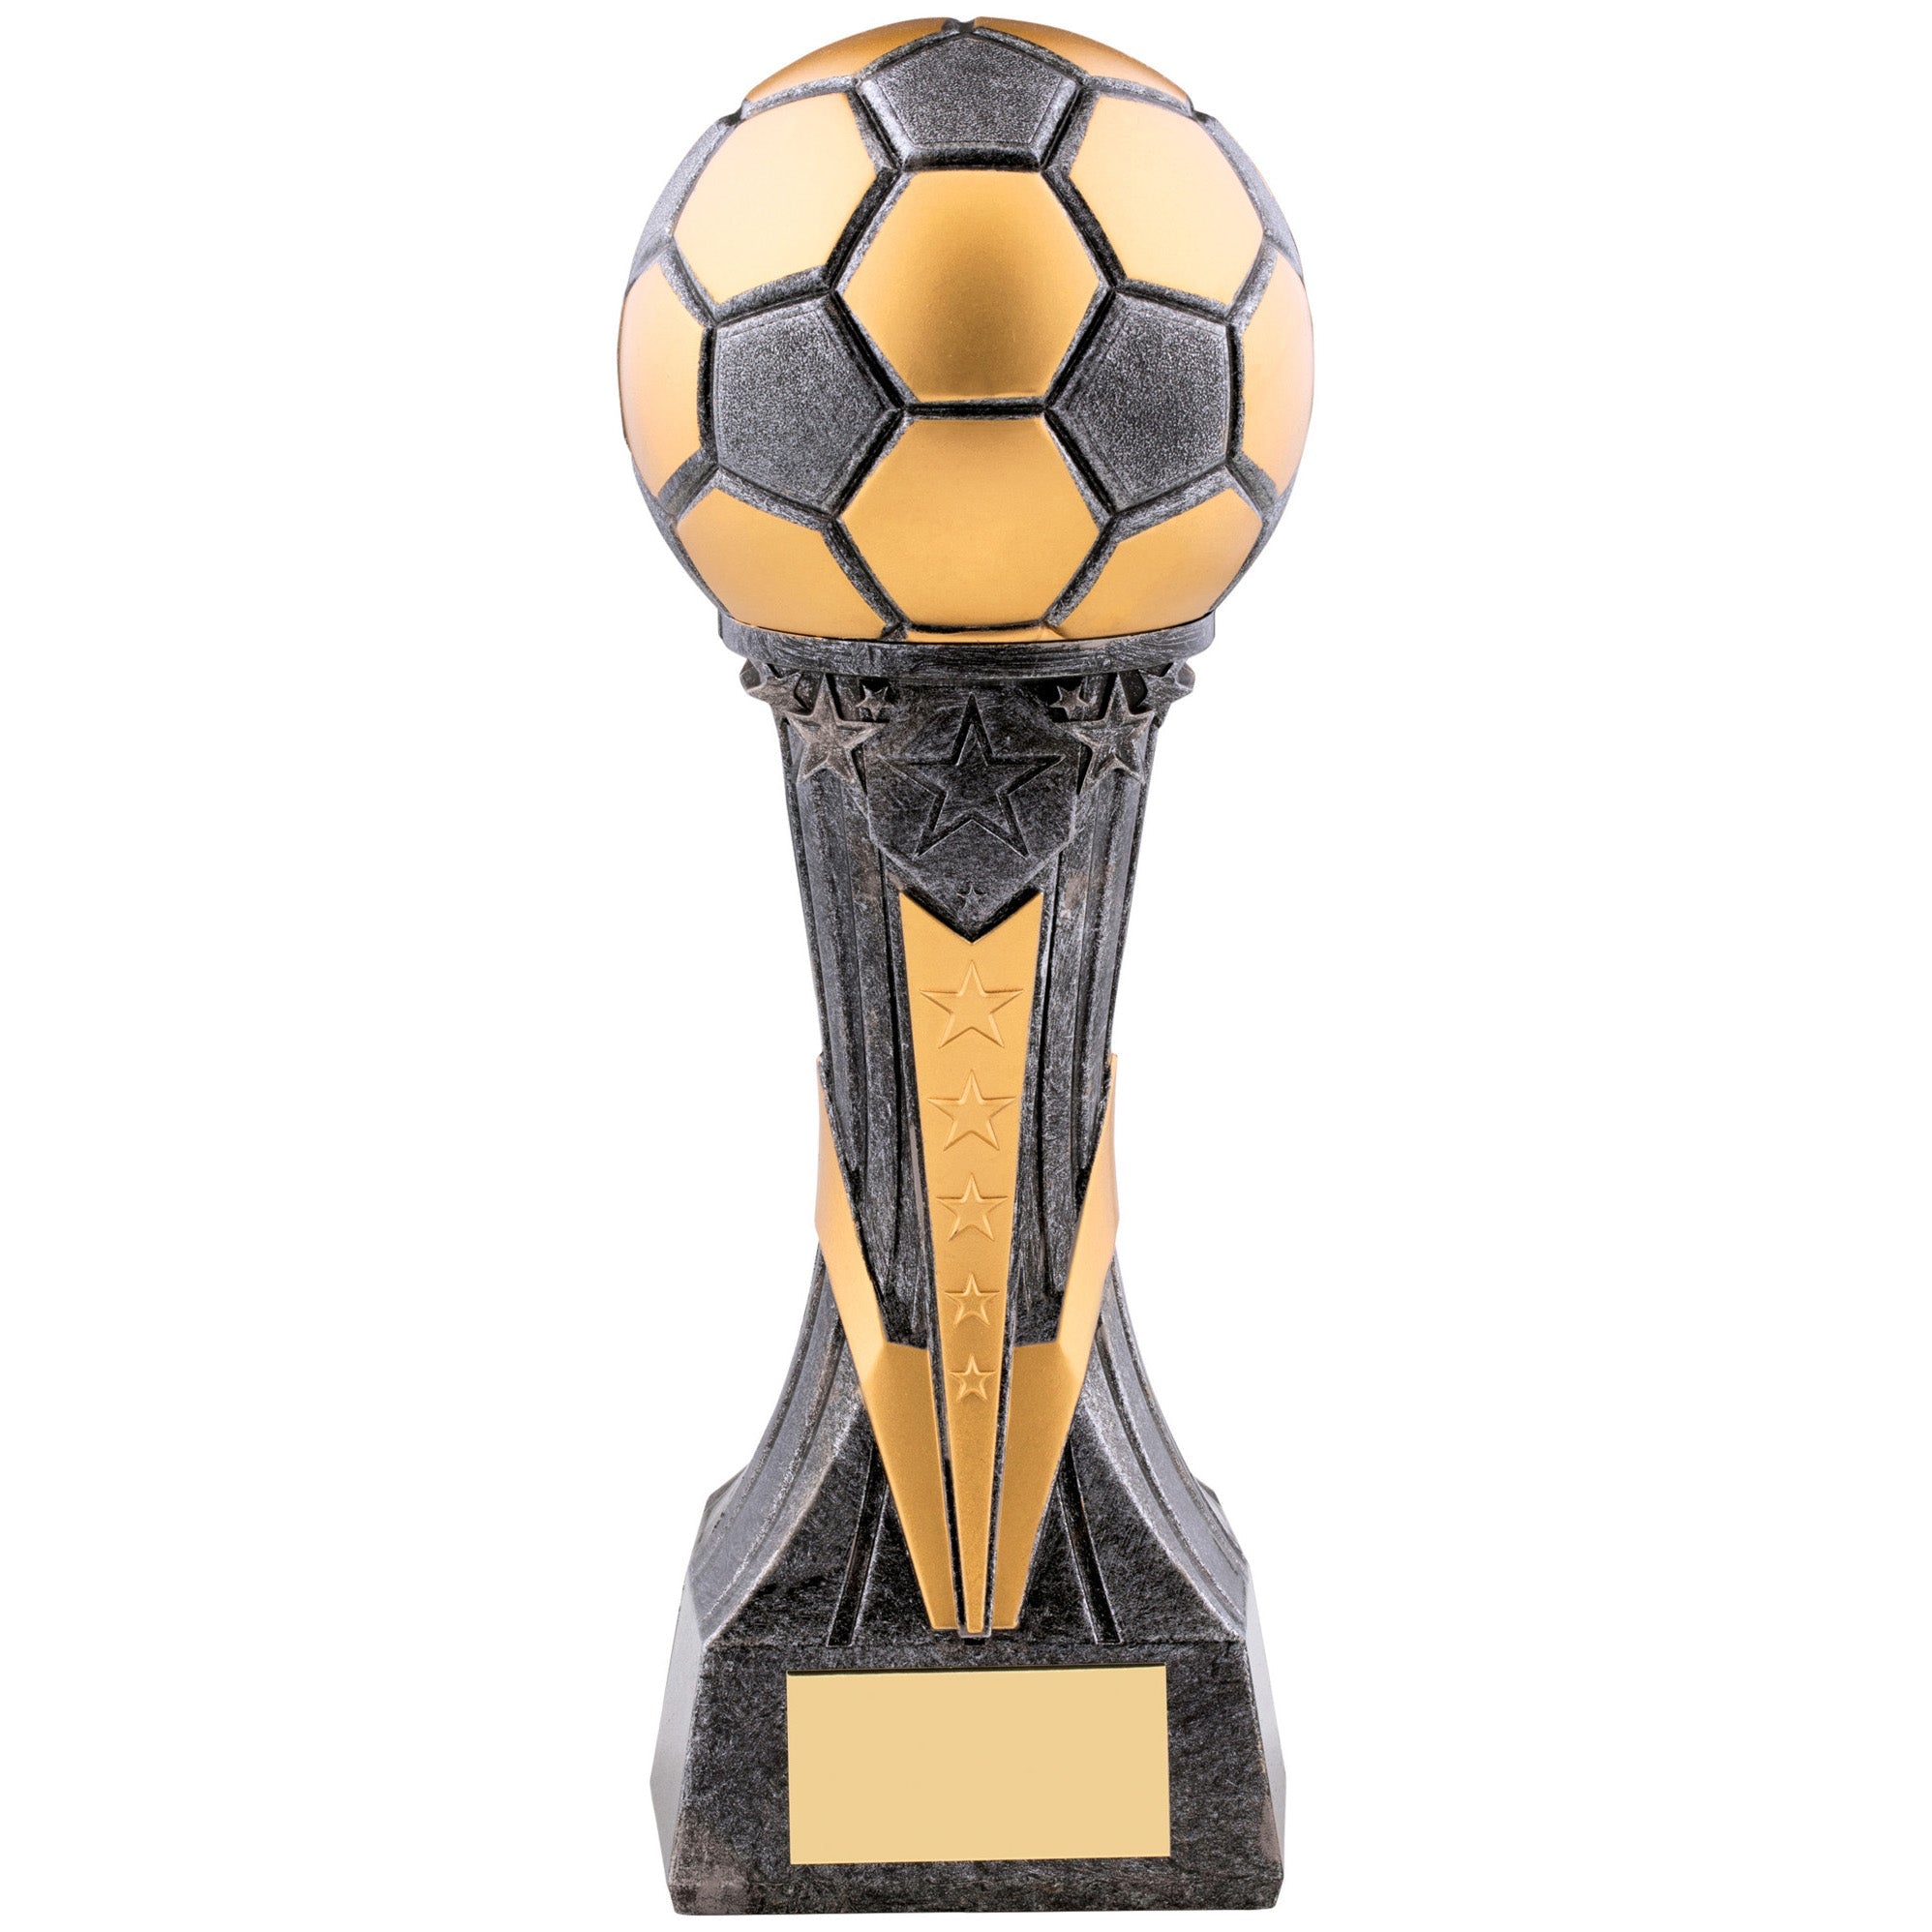 9.5" Cosmos Football Trophy (CLEARANCE)